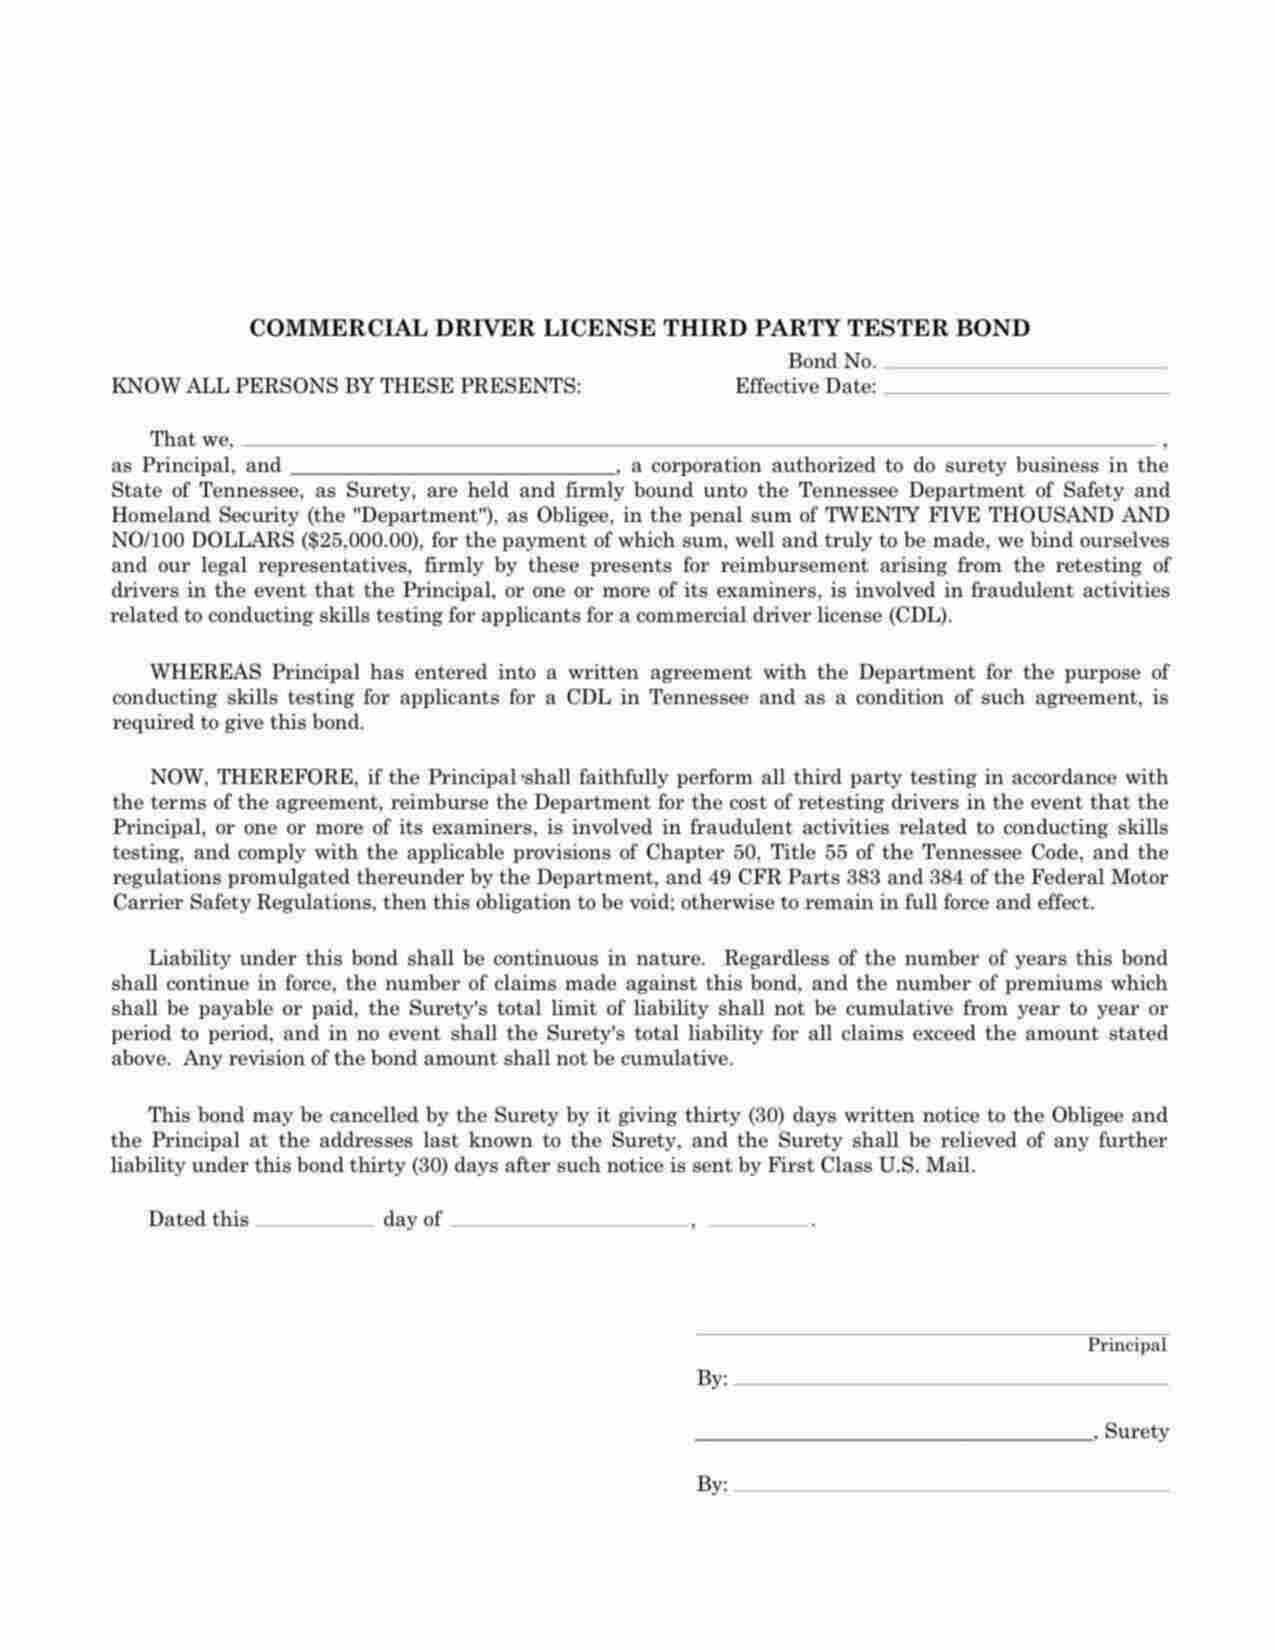 Tennessee Commercial Driver License (CDL) Third Party Tester Bond Form